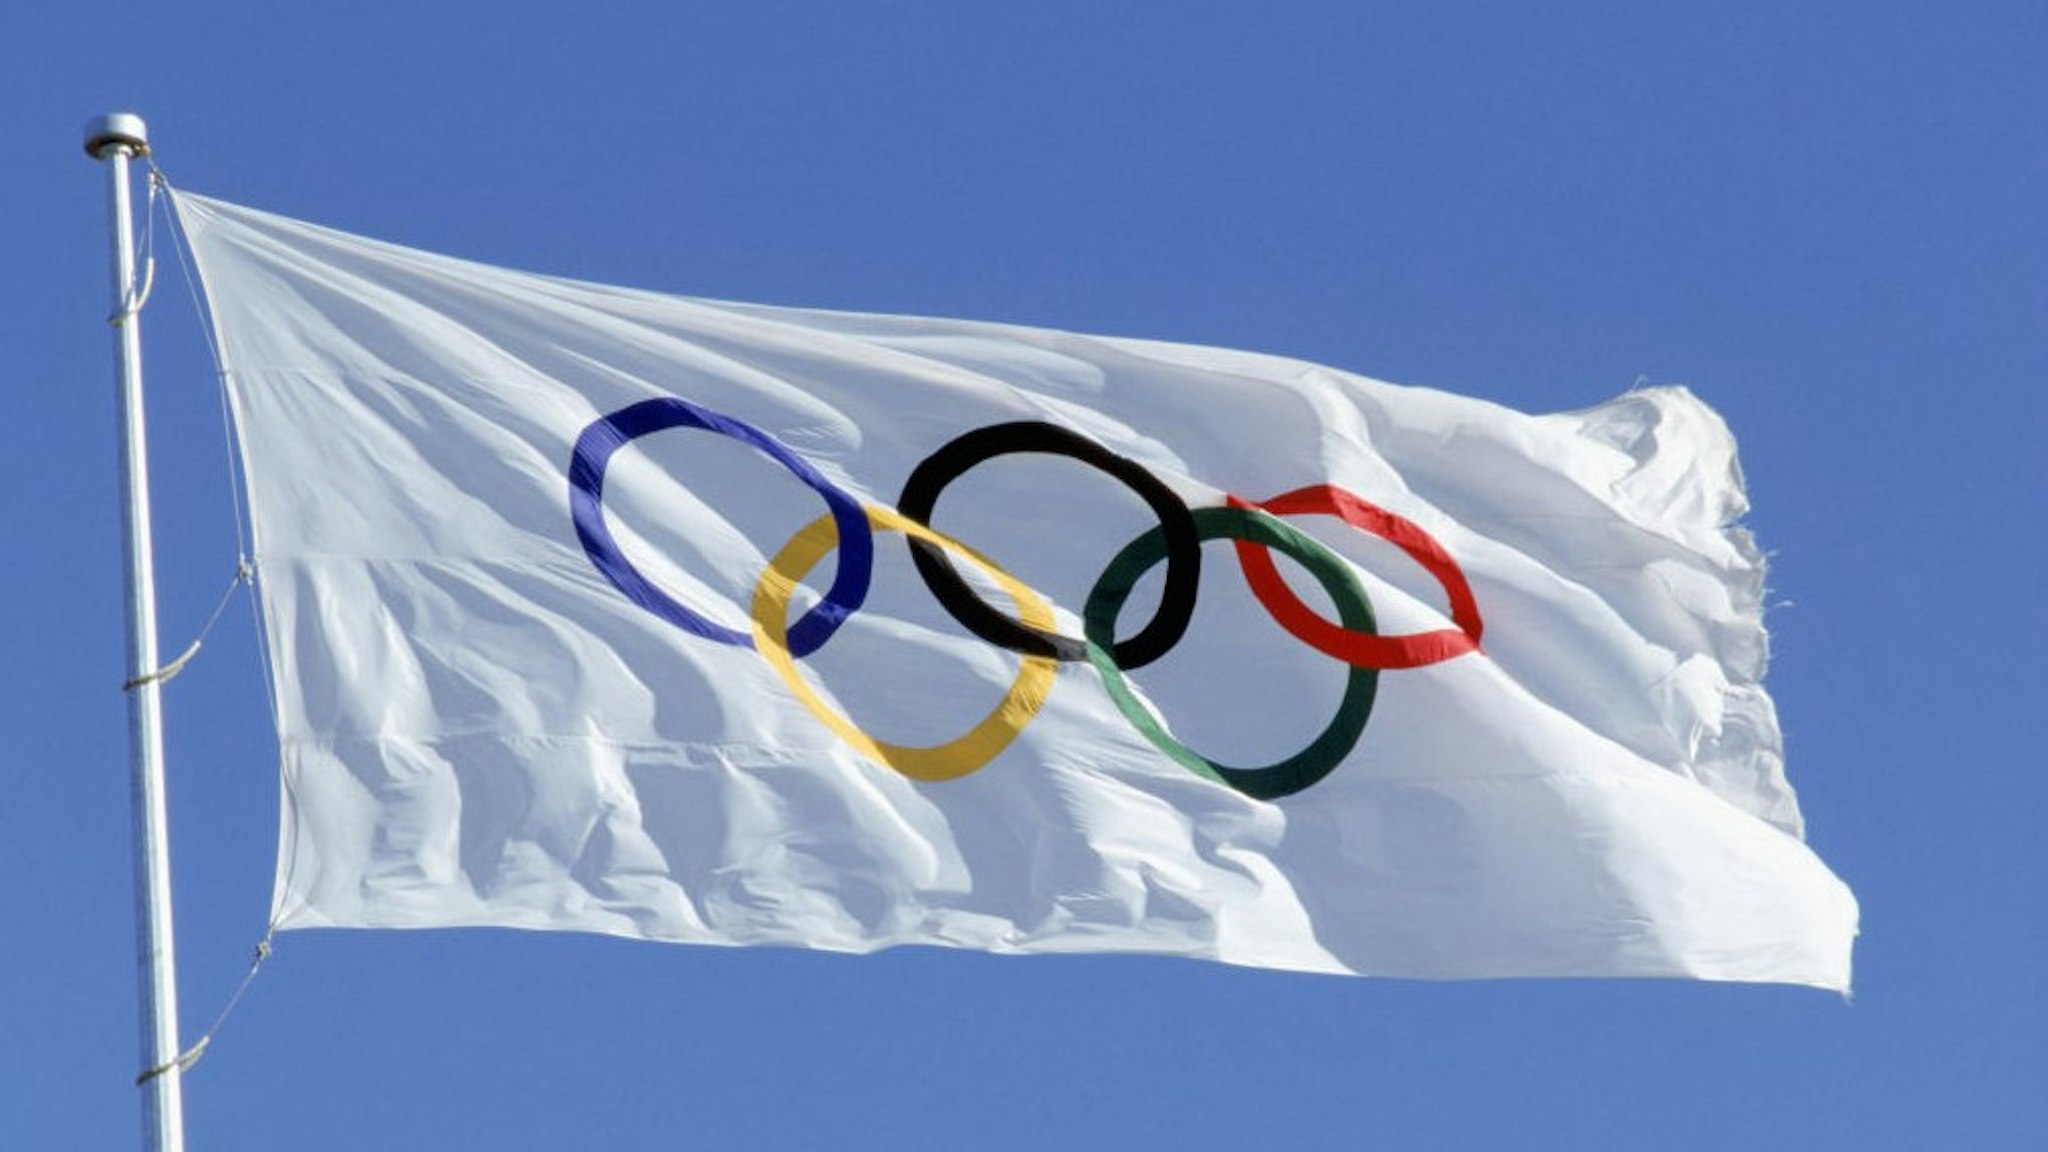 SEOUL, KOREA - FEBRUARY 1: A general view of the Official Olympic Flag taken during the 1988 Olympic Games in Seoul, Korea. (Photo by: